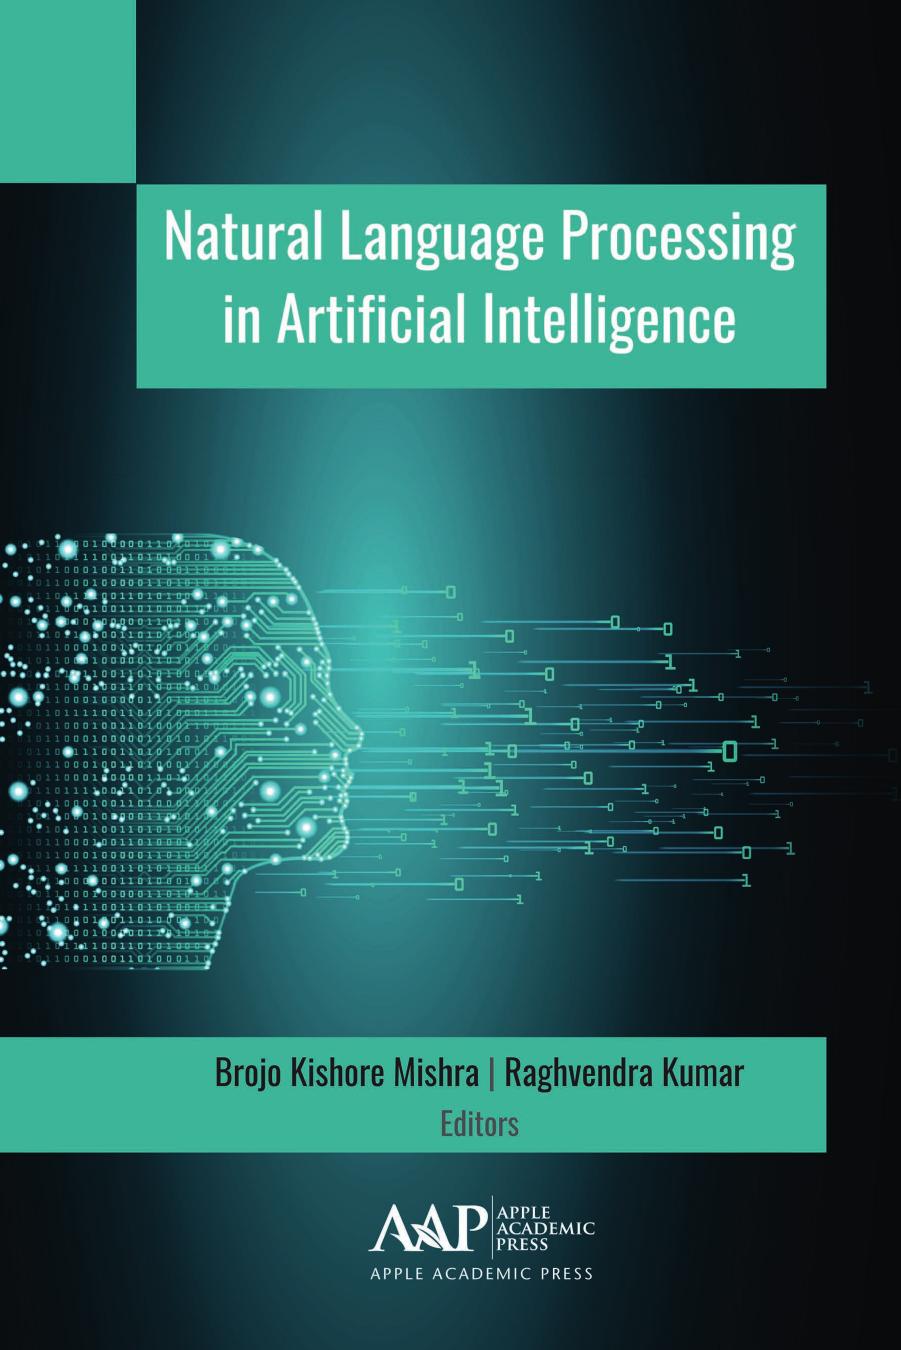 Natural Language Processing in Artificial Intelligence